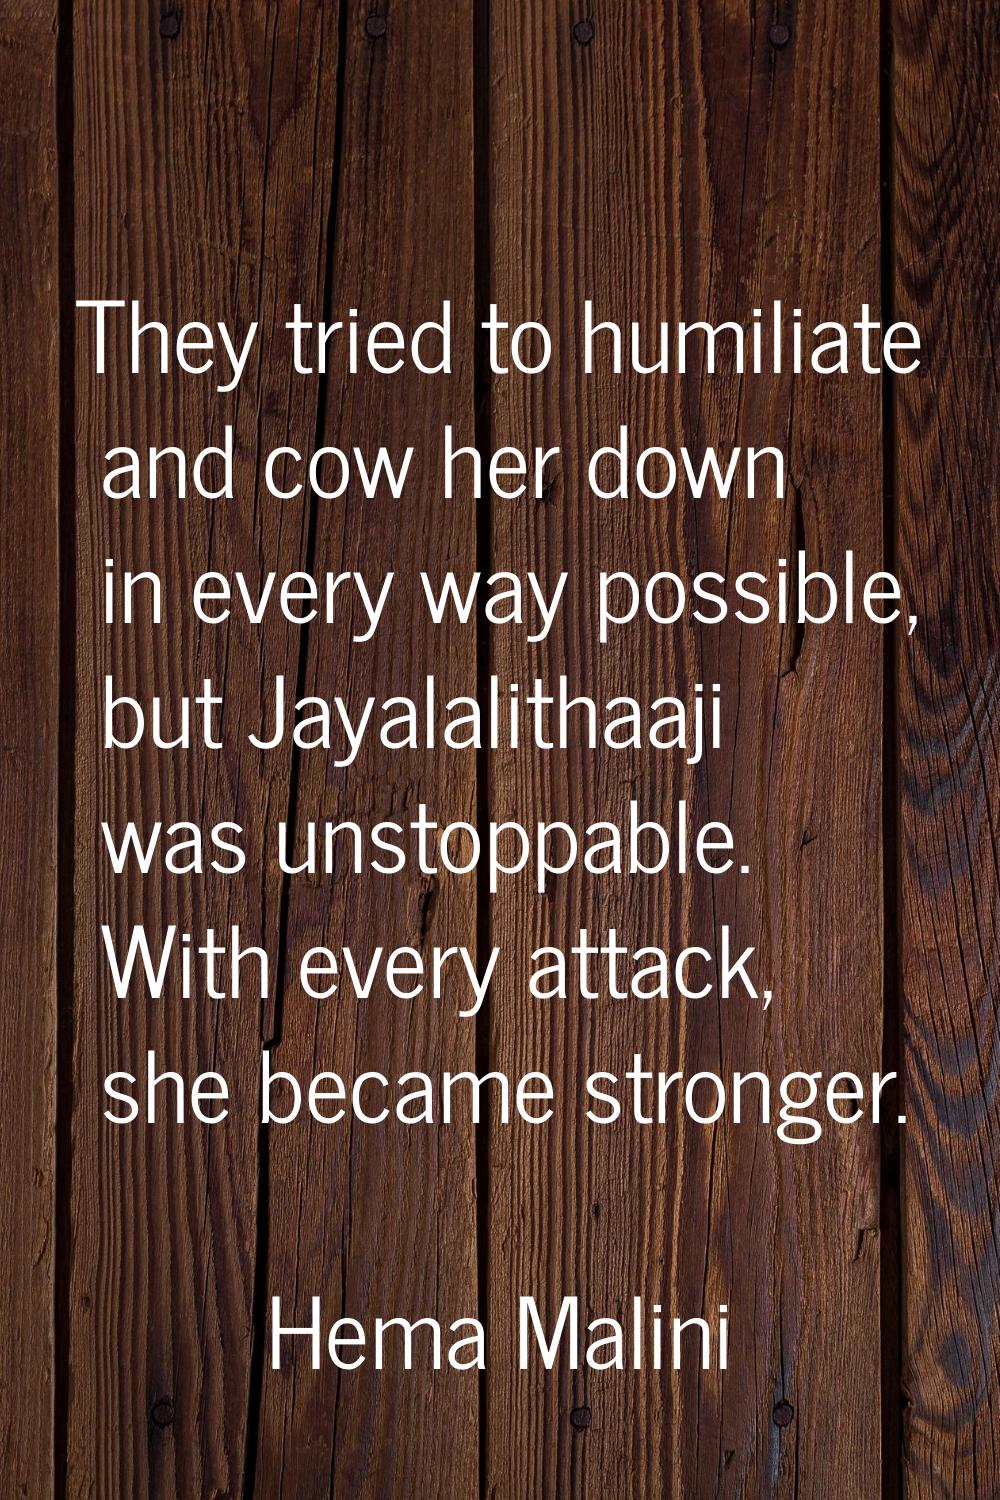 They tried to humiliate and cow her down in every way possible, but Jayalalithaaji was unstoppable.